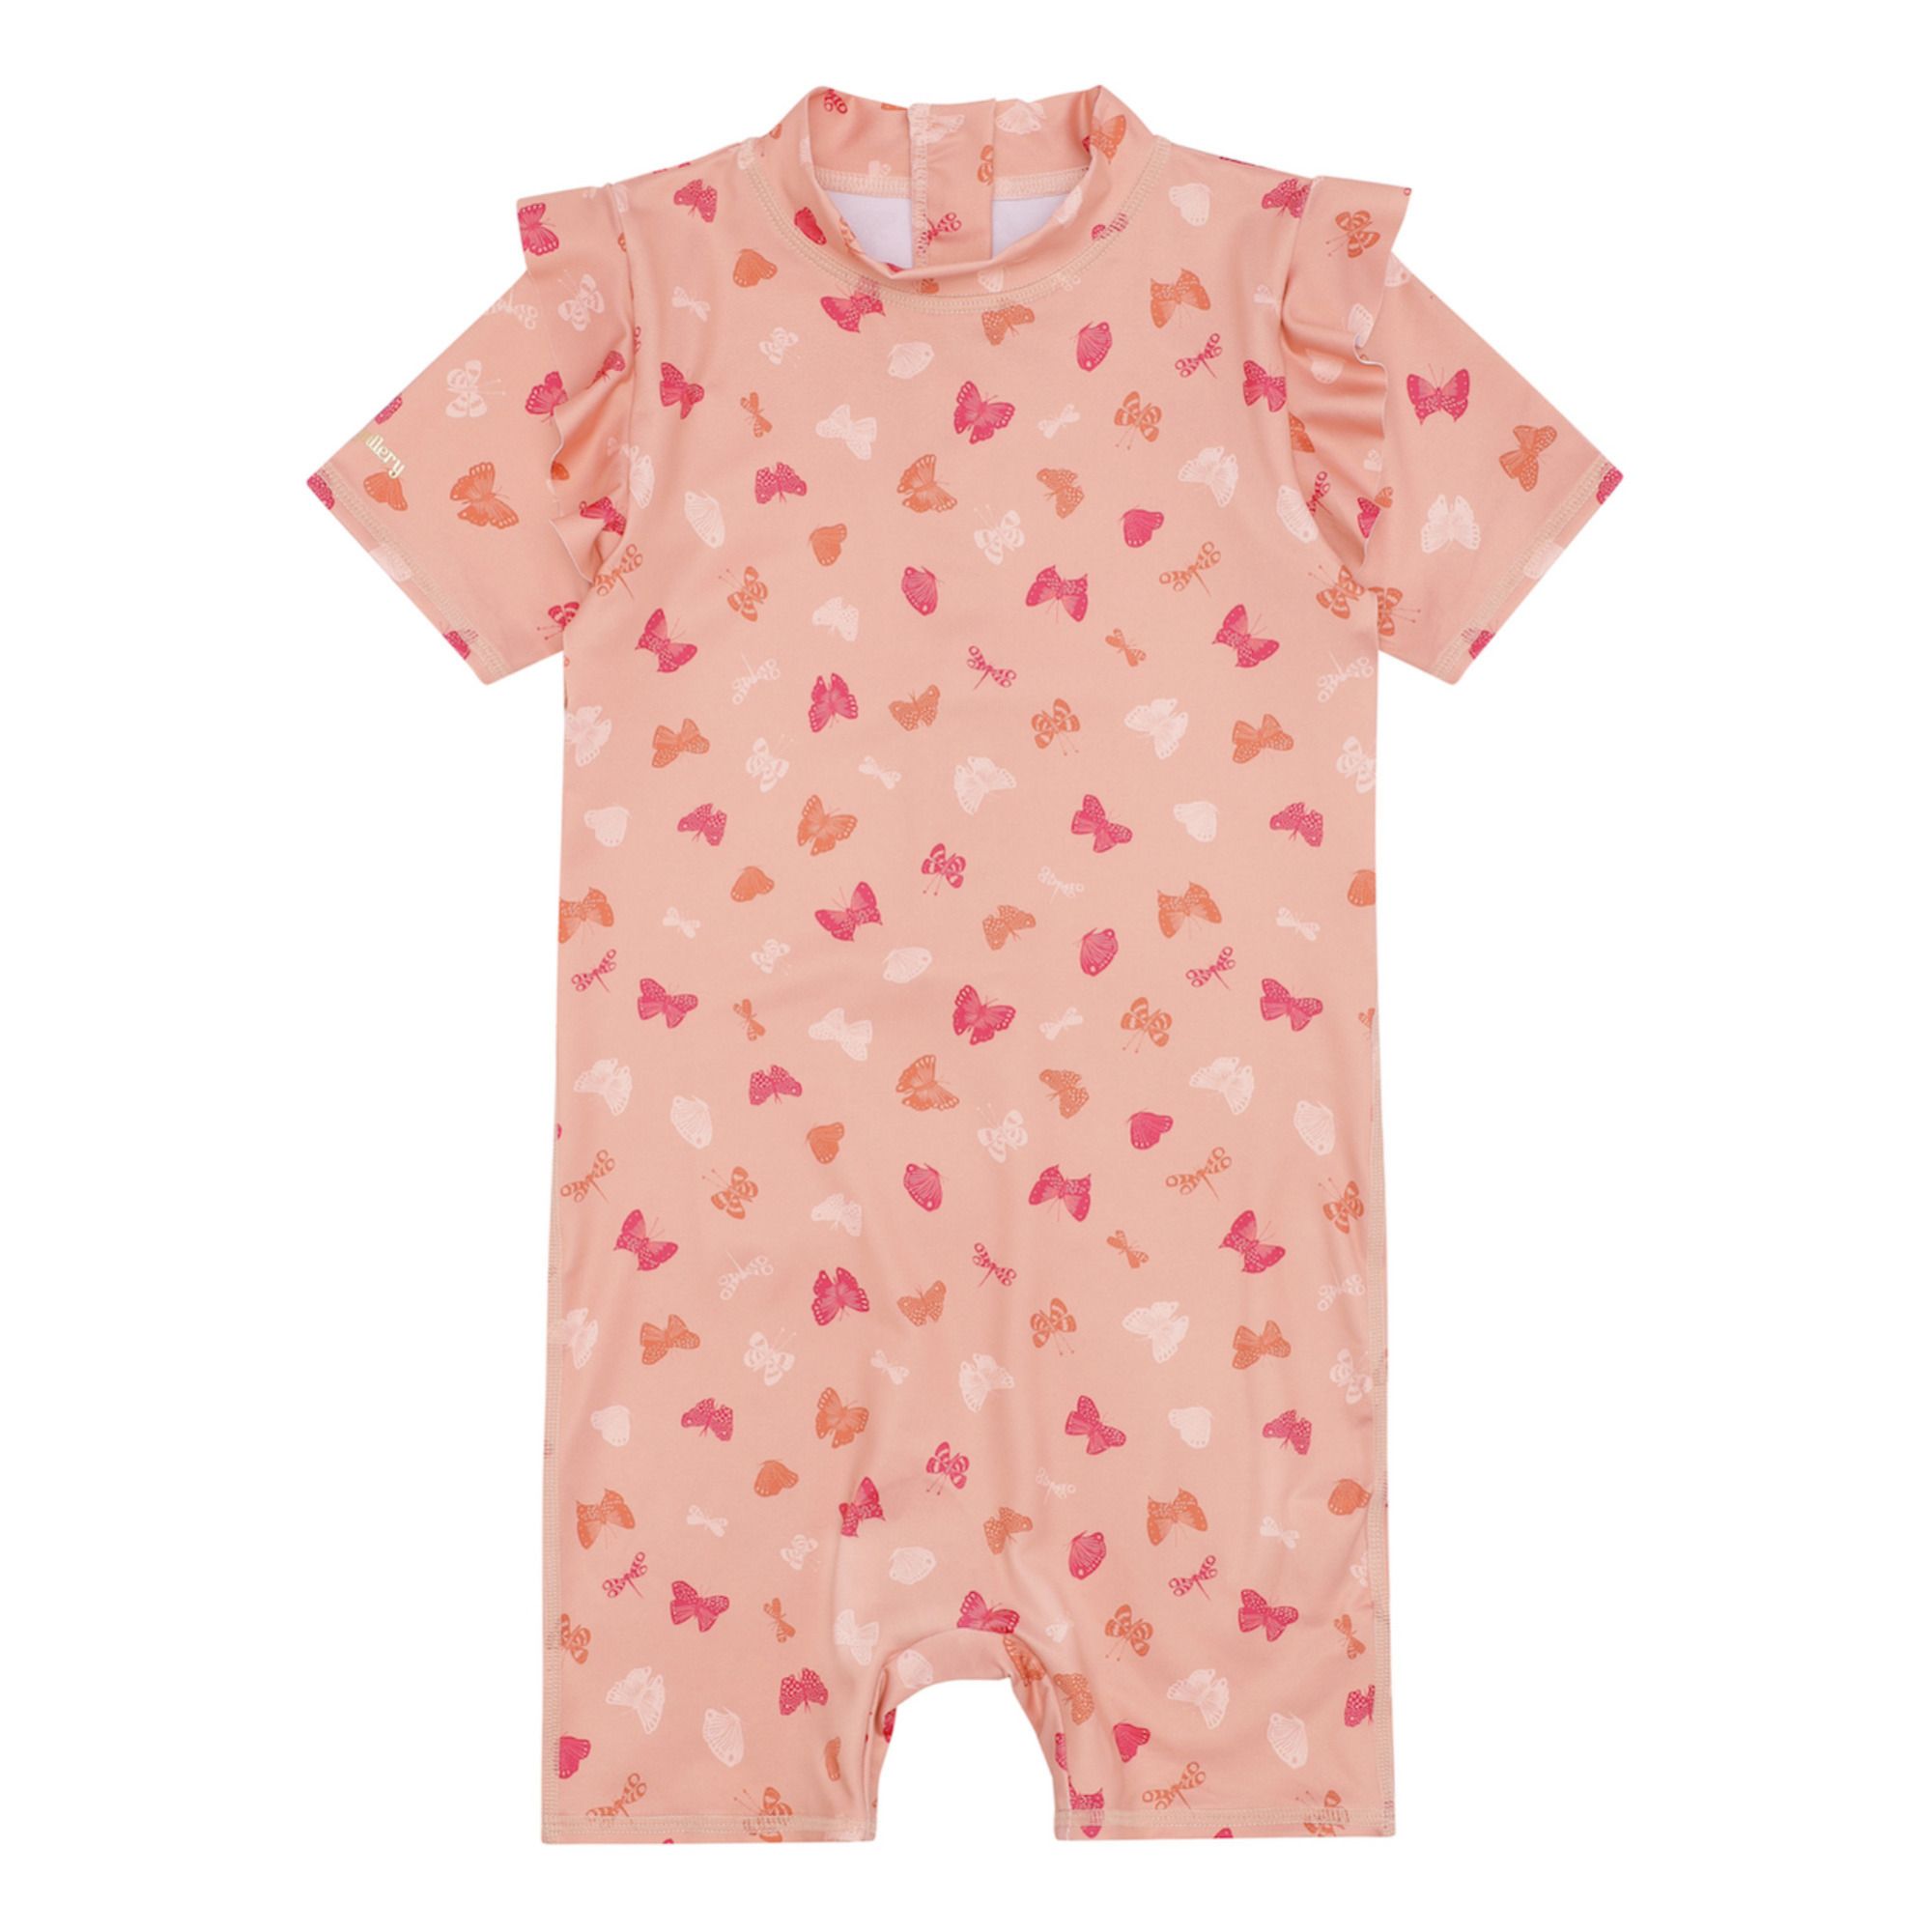 Soft Gallery - Combinaison Filly Papillons Polyester Recyclé Anti-UV - Fille - Rose pêche